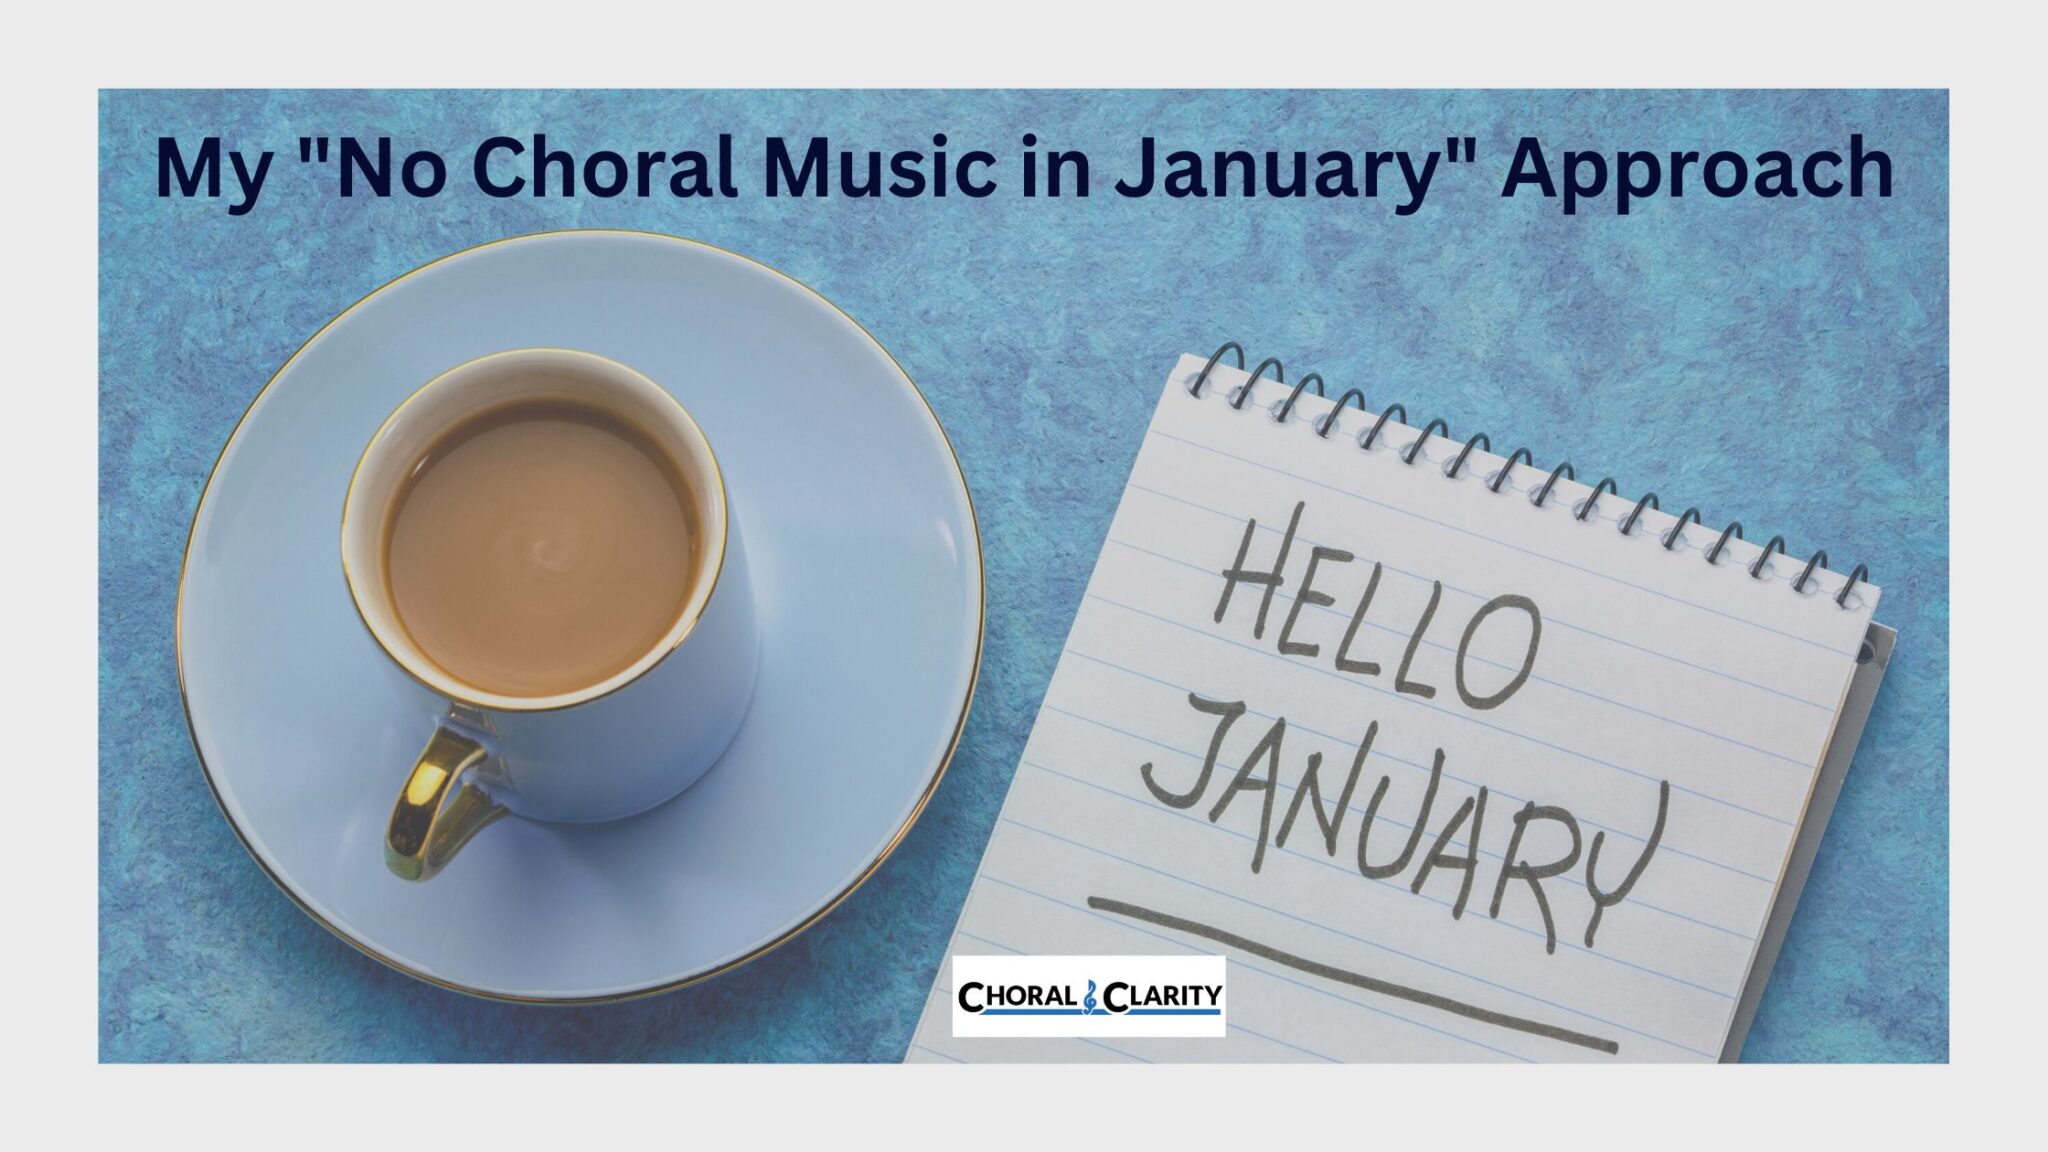 My “NO CHORAL MUSIC in JANUARY” Approach